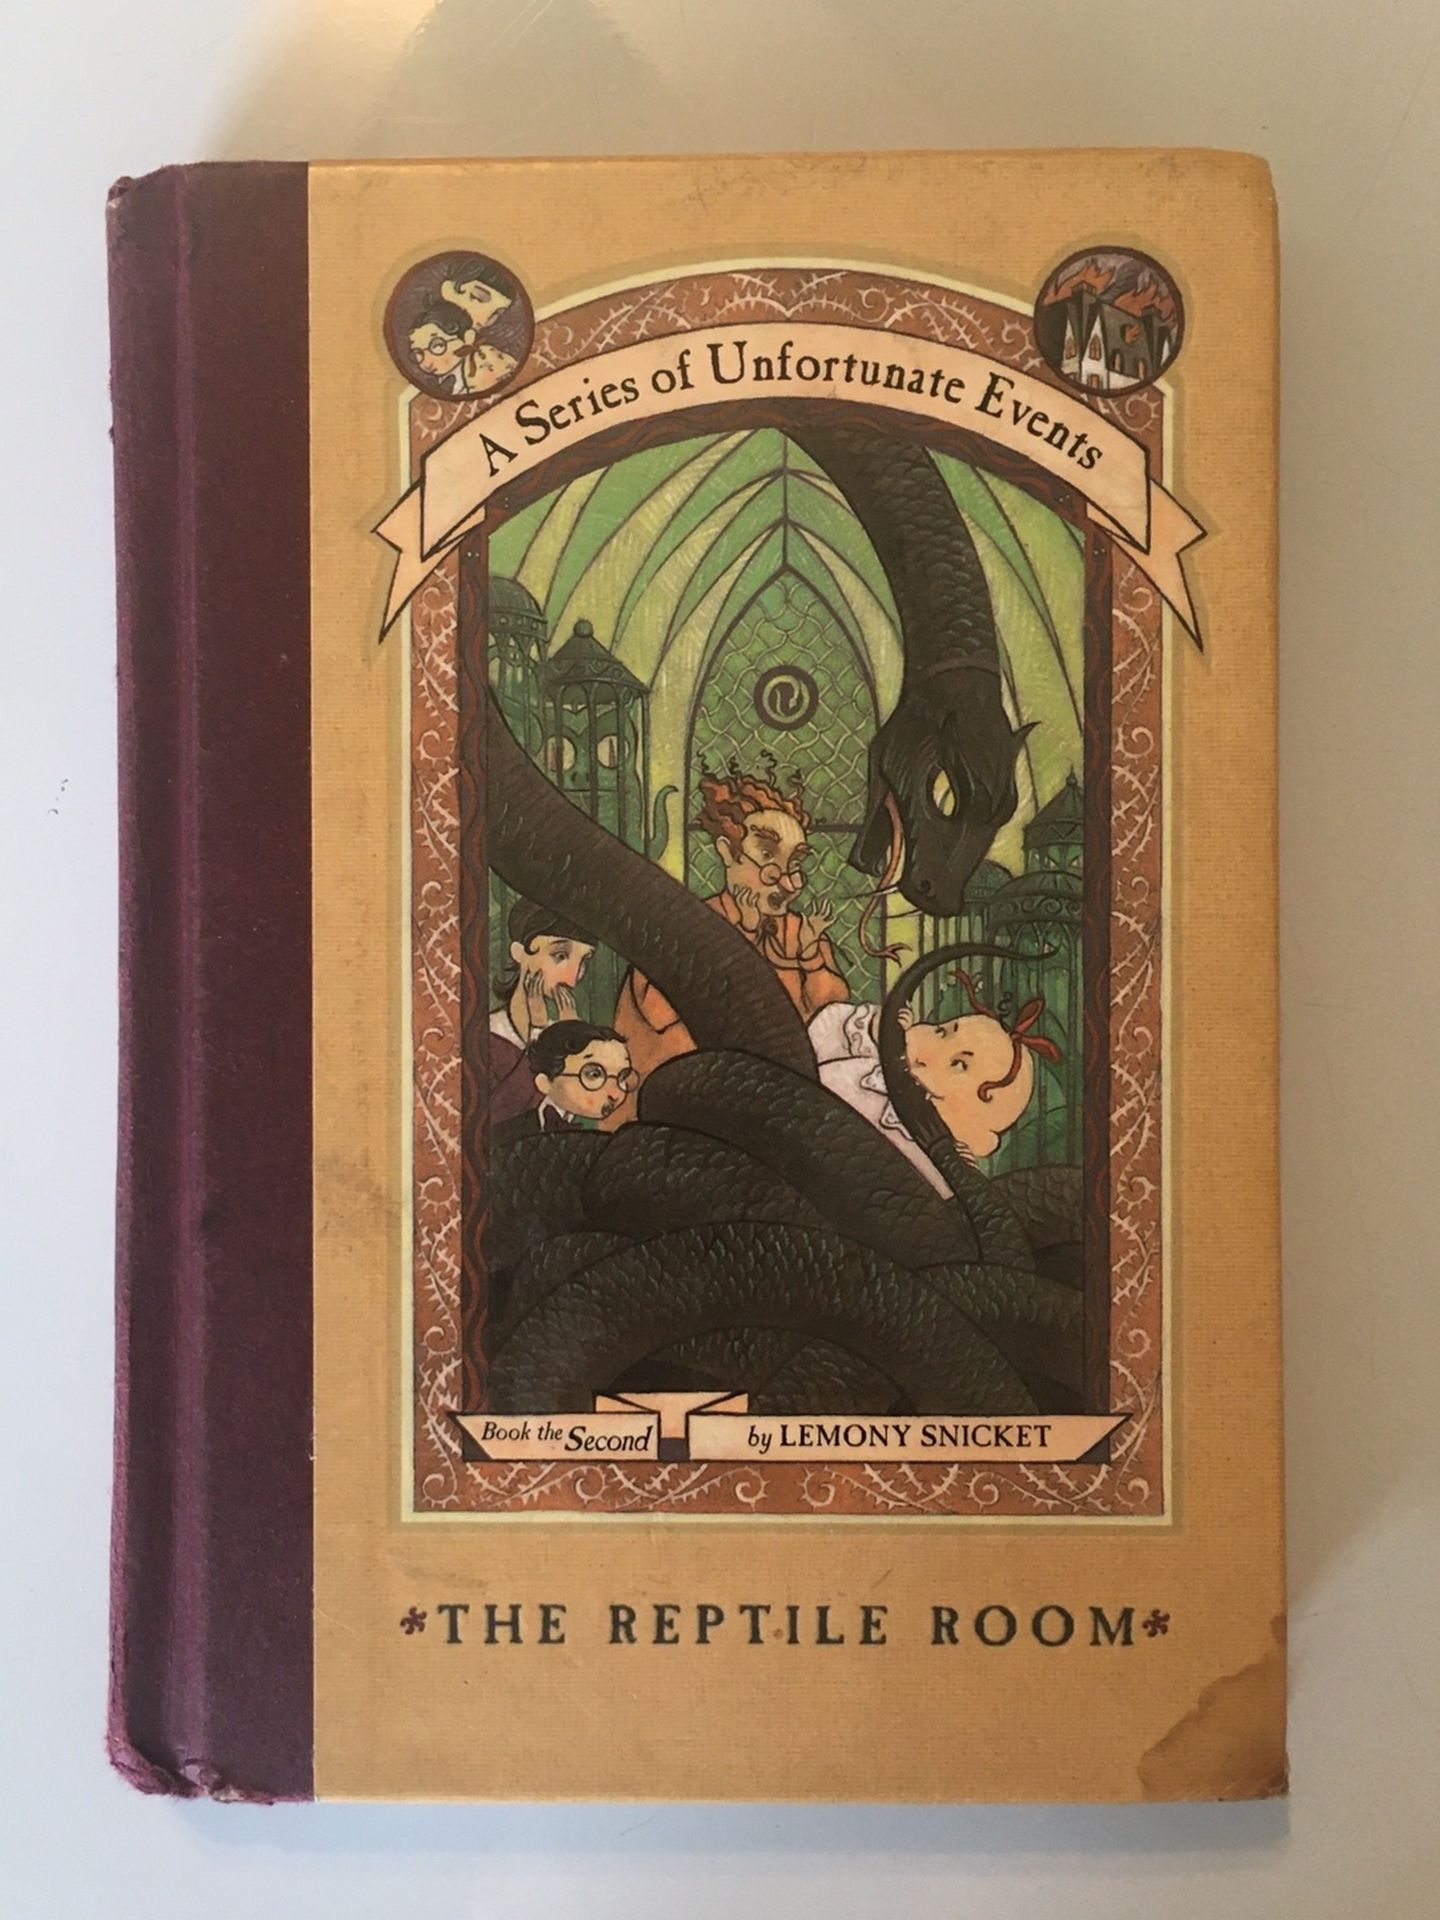 Lemony Snicket’s (A Series Of Unfortunate Events) #2 : The Reptile Room